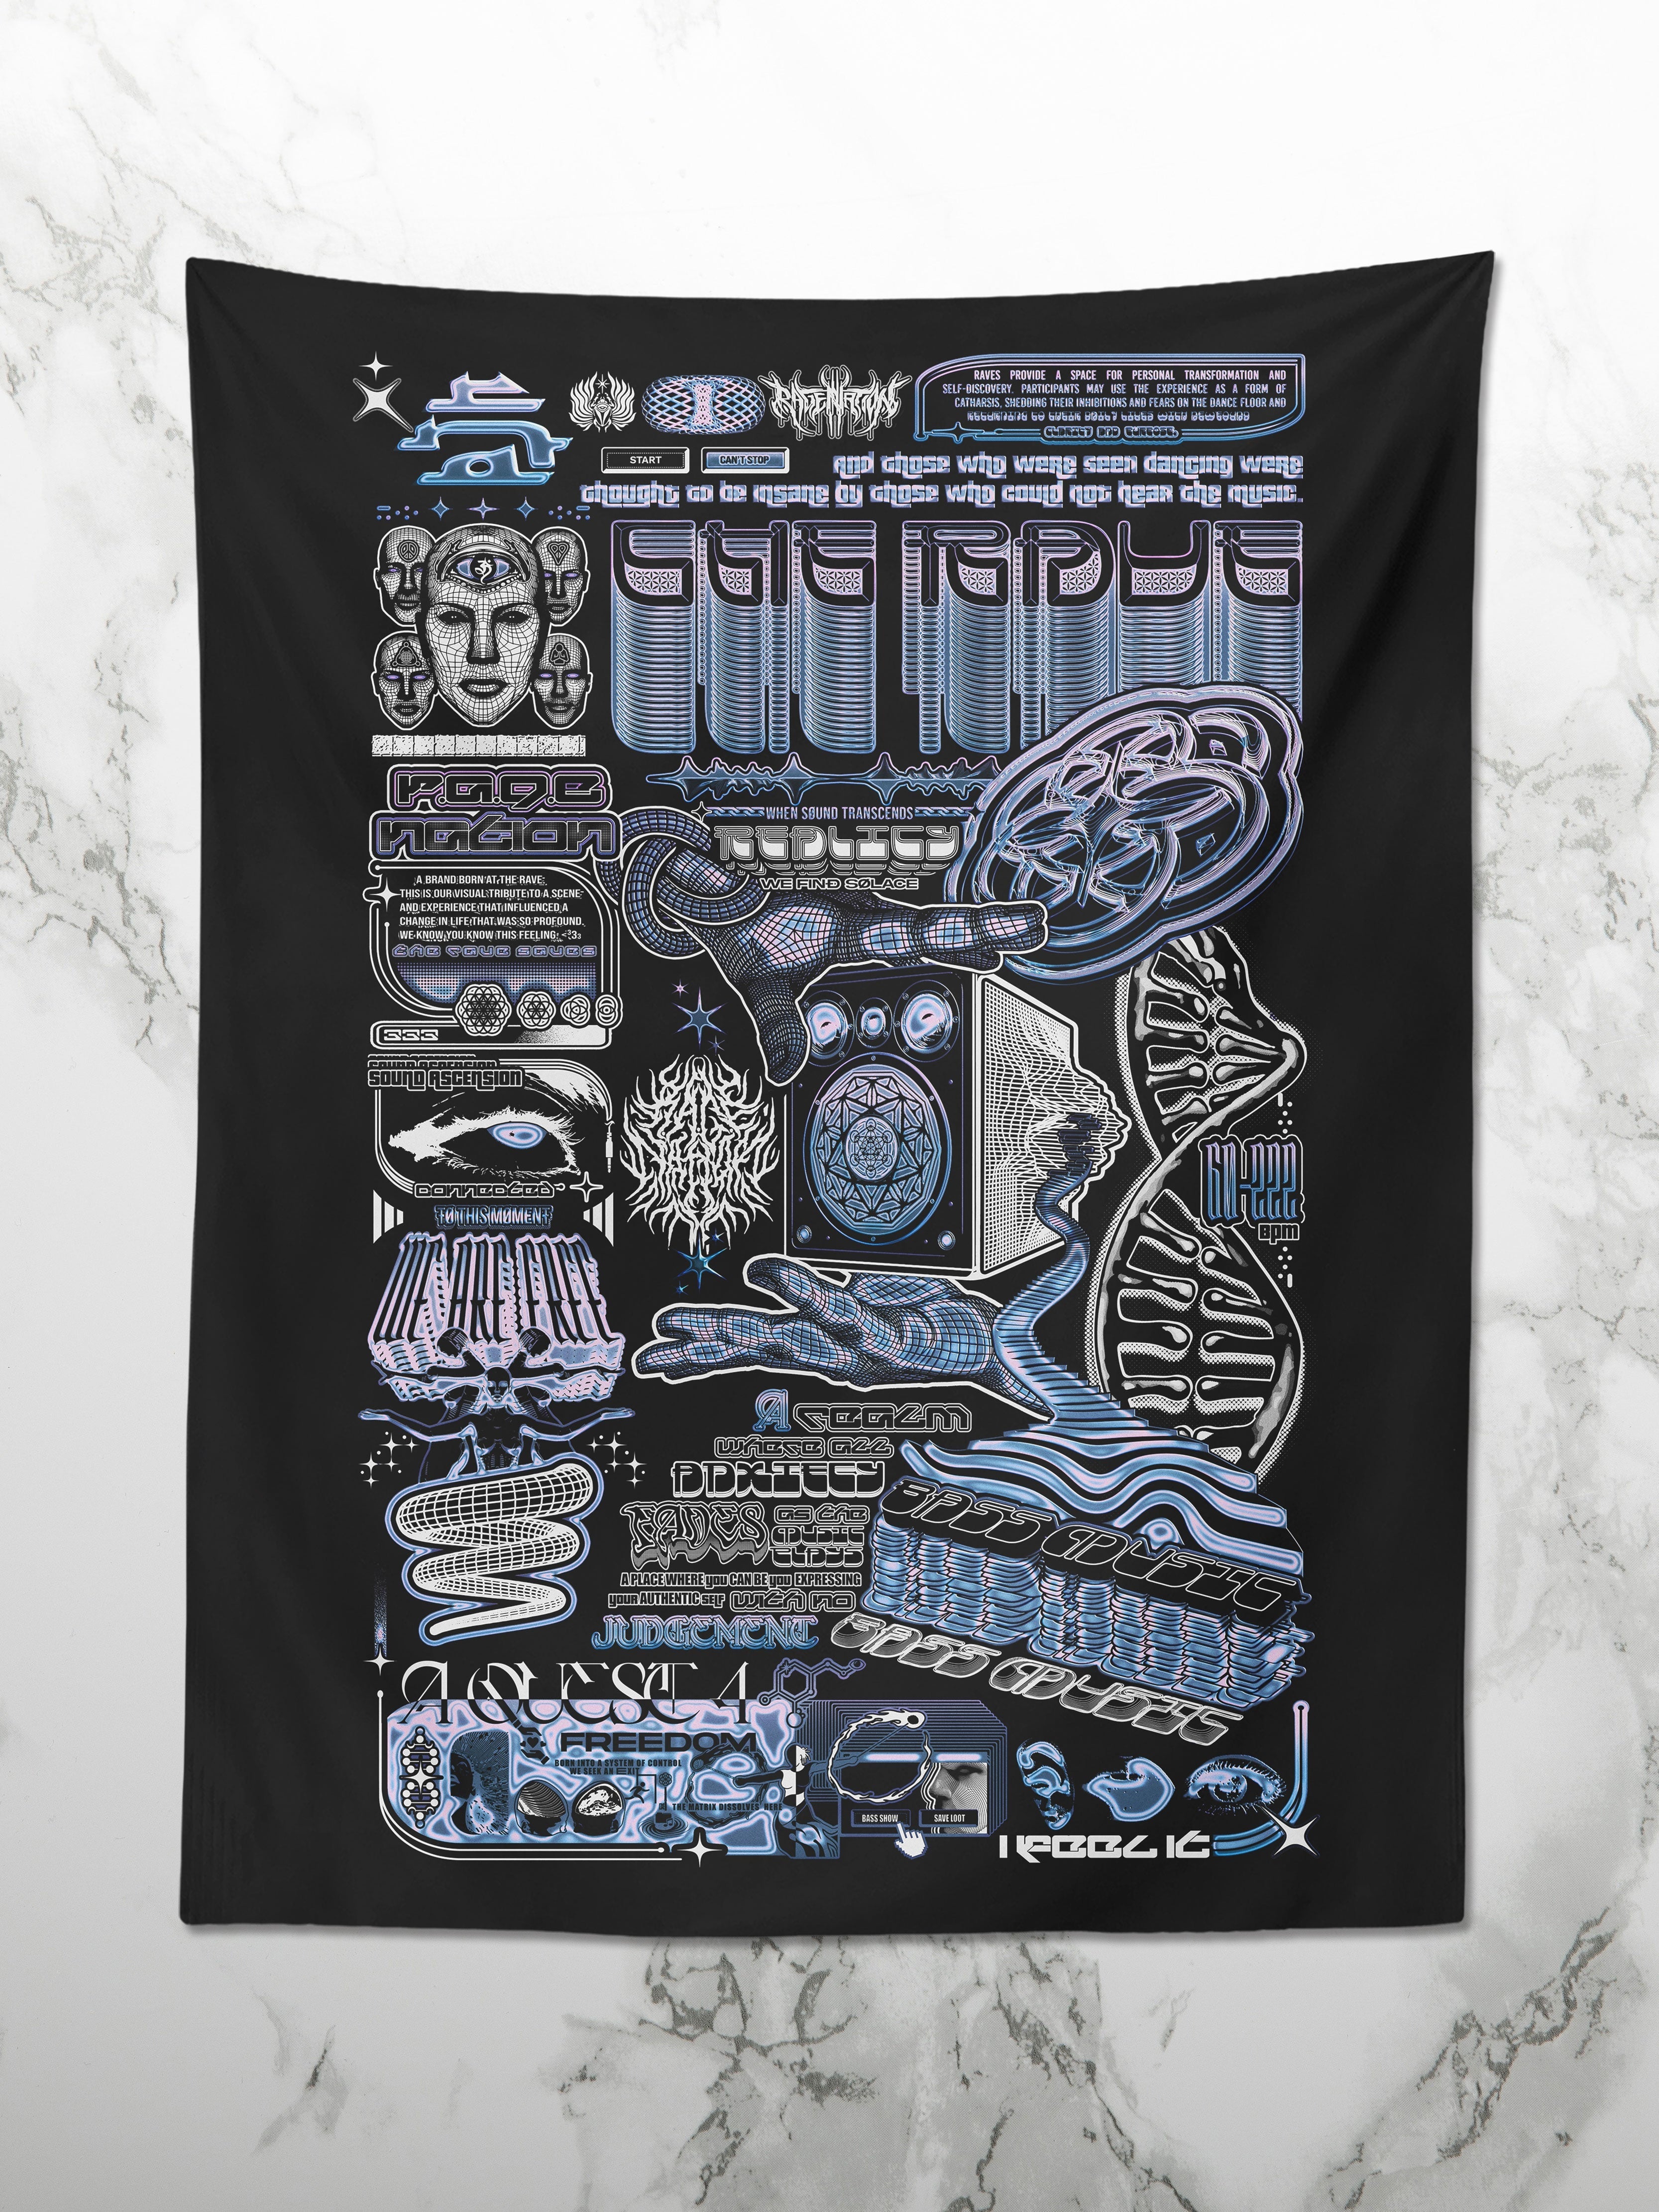 THE RAVE 002 ✦ RAGE NATION ✦ 111 Limited Edition Tapestry Tapestry 